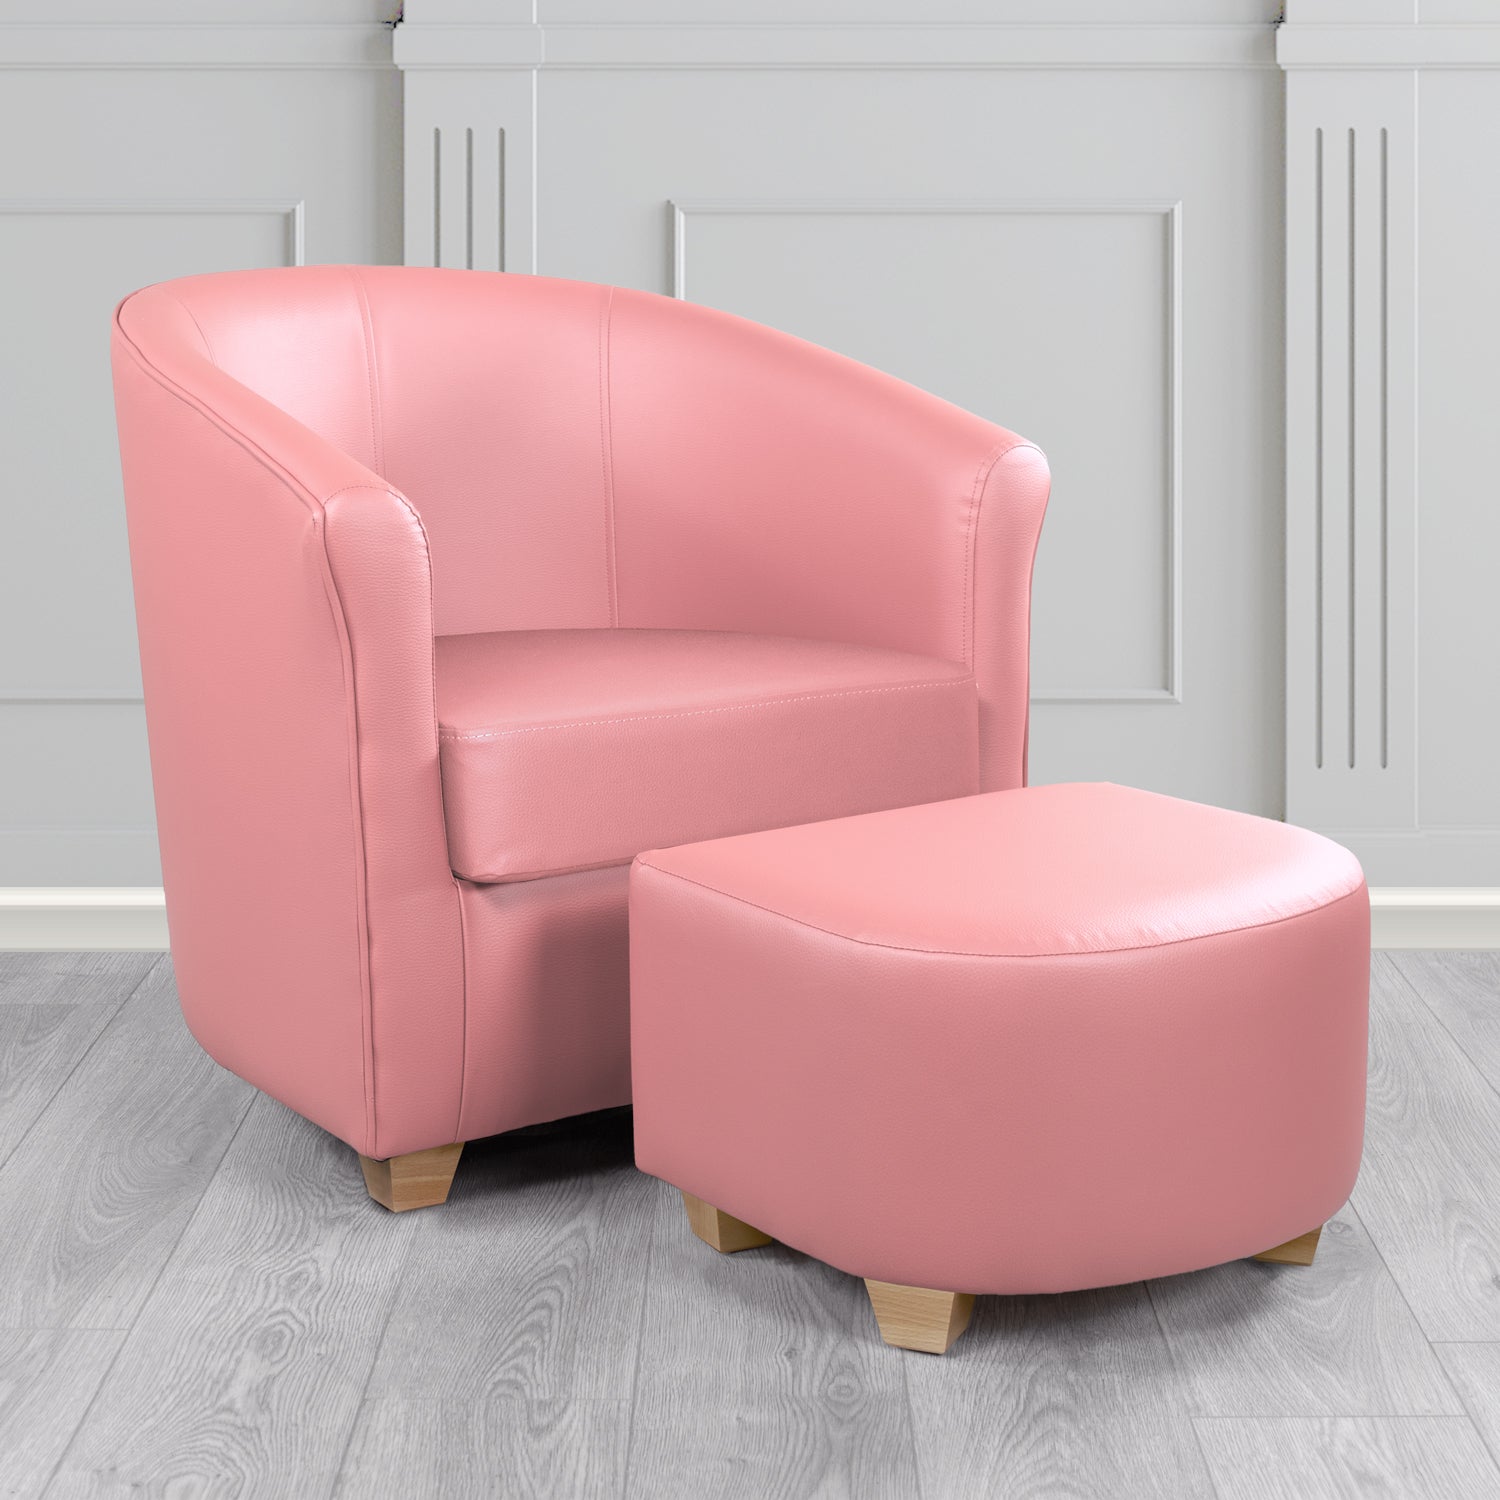 Cannes Tub Chair with Footstool Set in Just Colour Cherry Blossom Crib 5 Faux Leather - The Tub Chair Shop